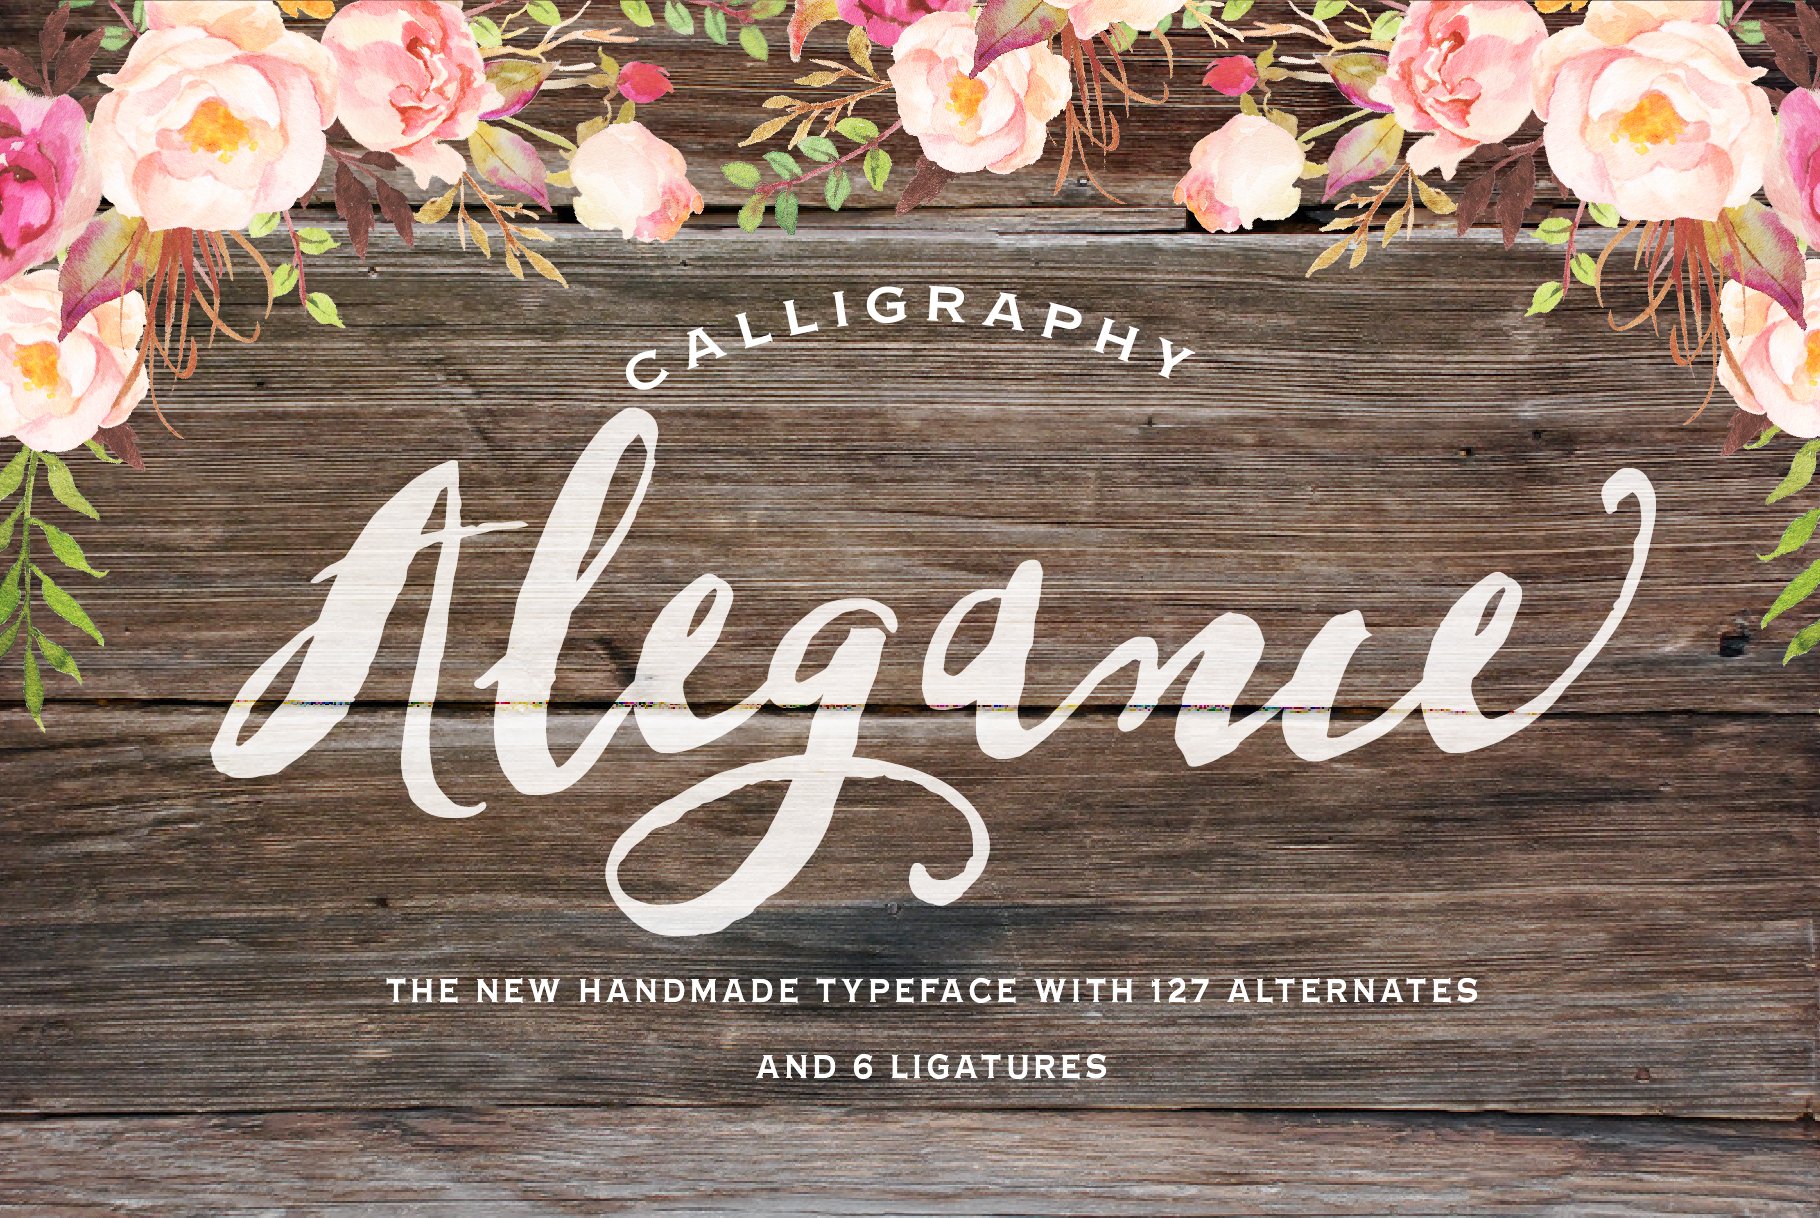 Alegance Typeface cover image.